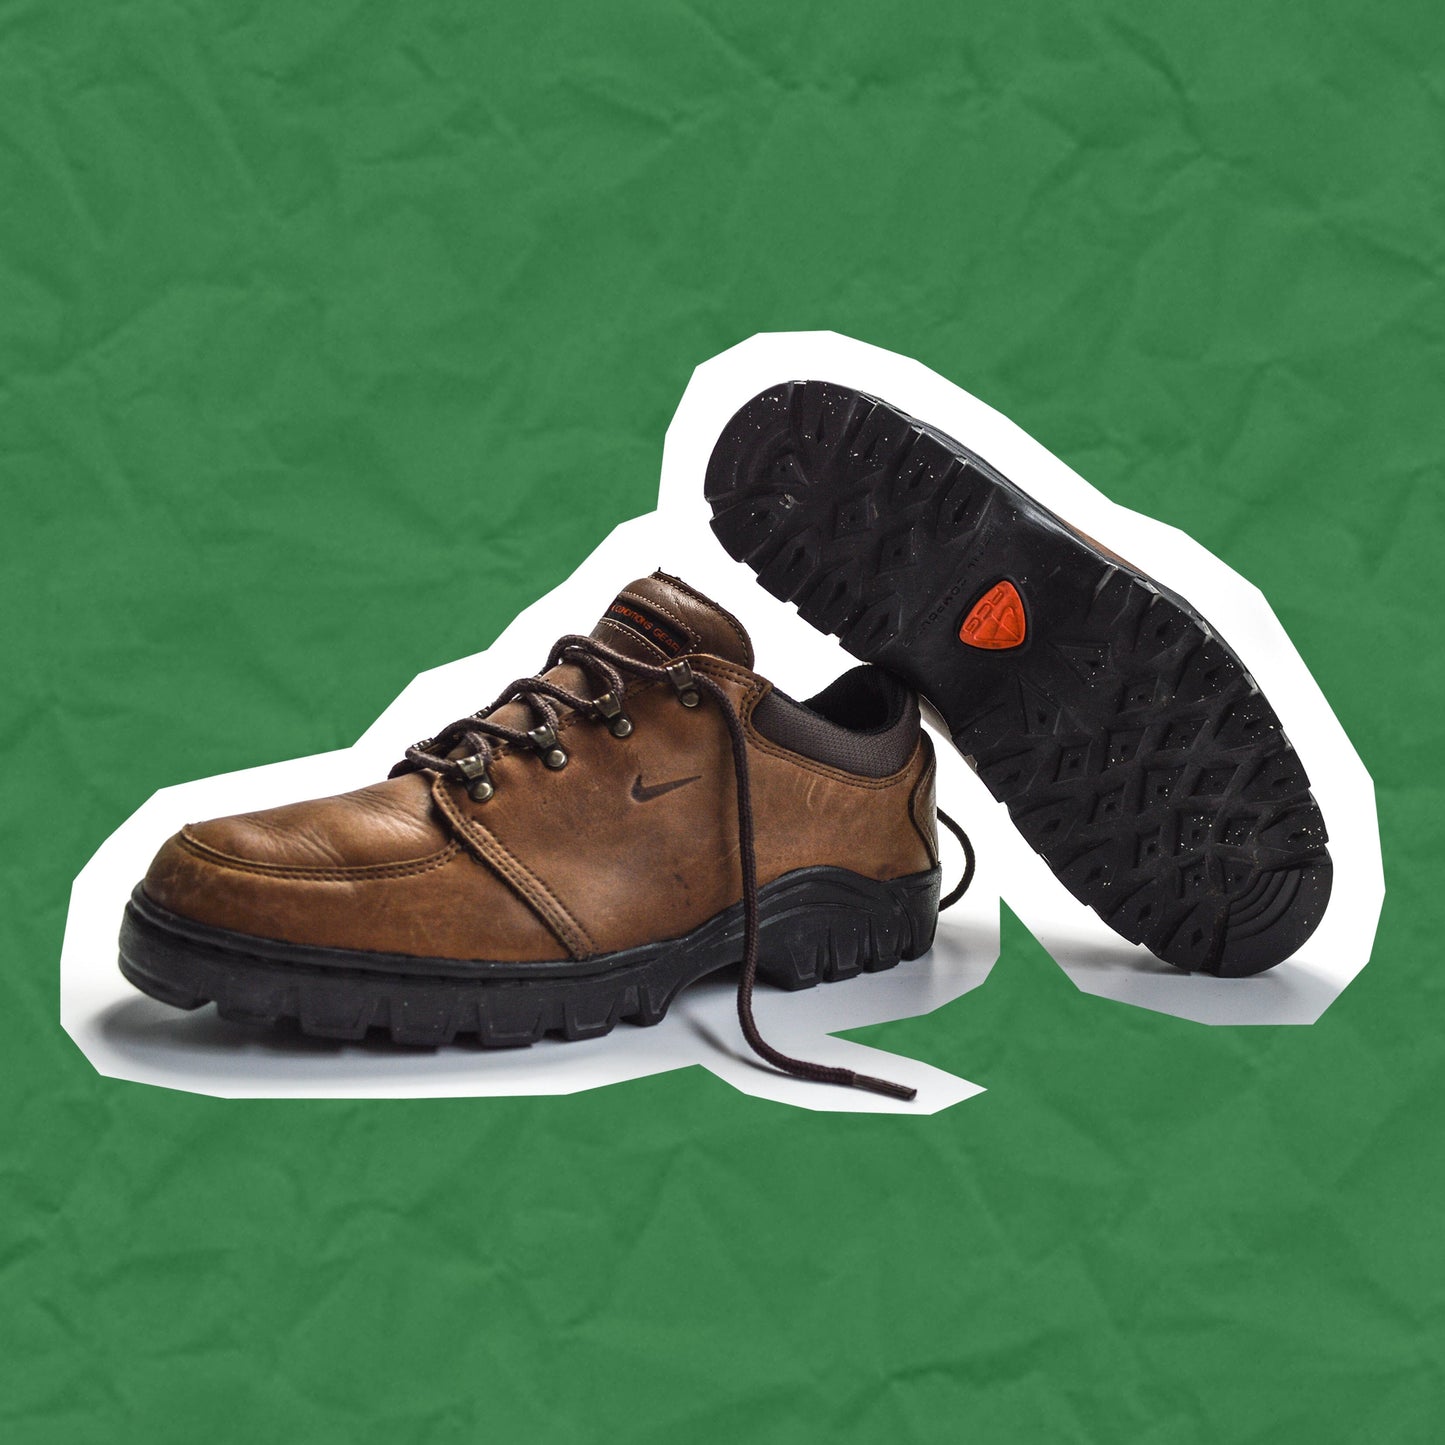 Nike ACG 1999 Low Leather Hiking Boots (UK9.5)